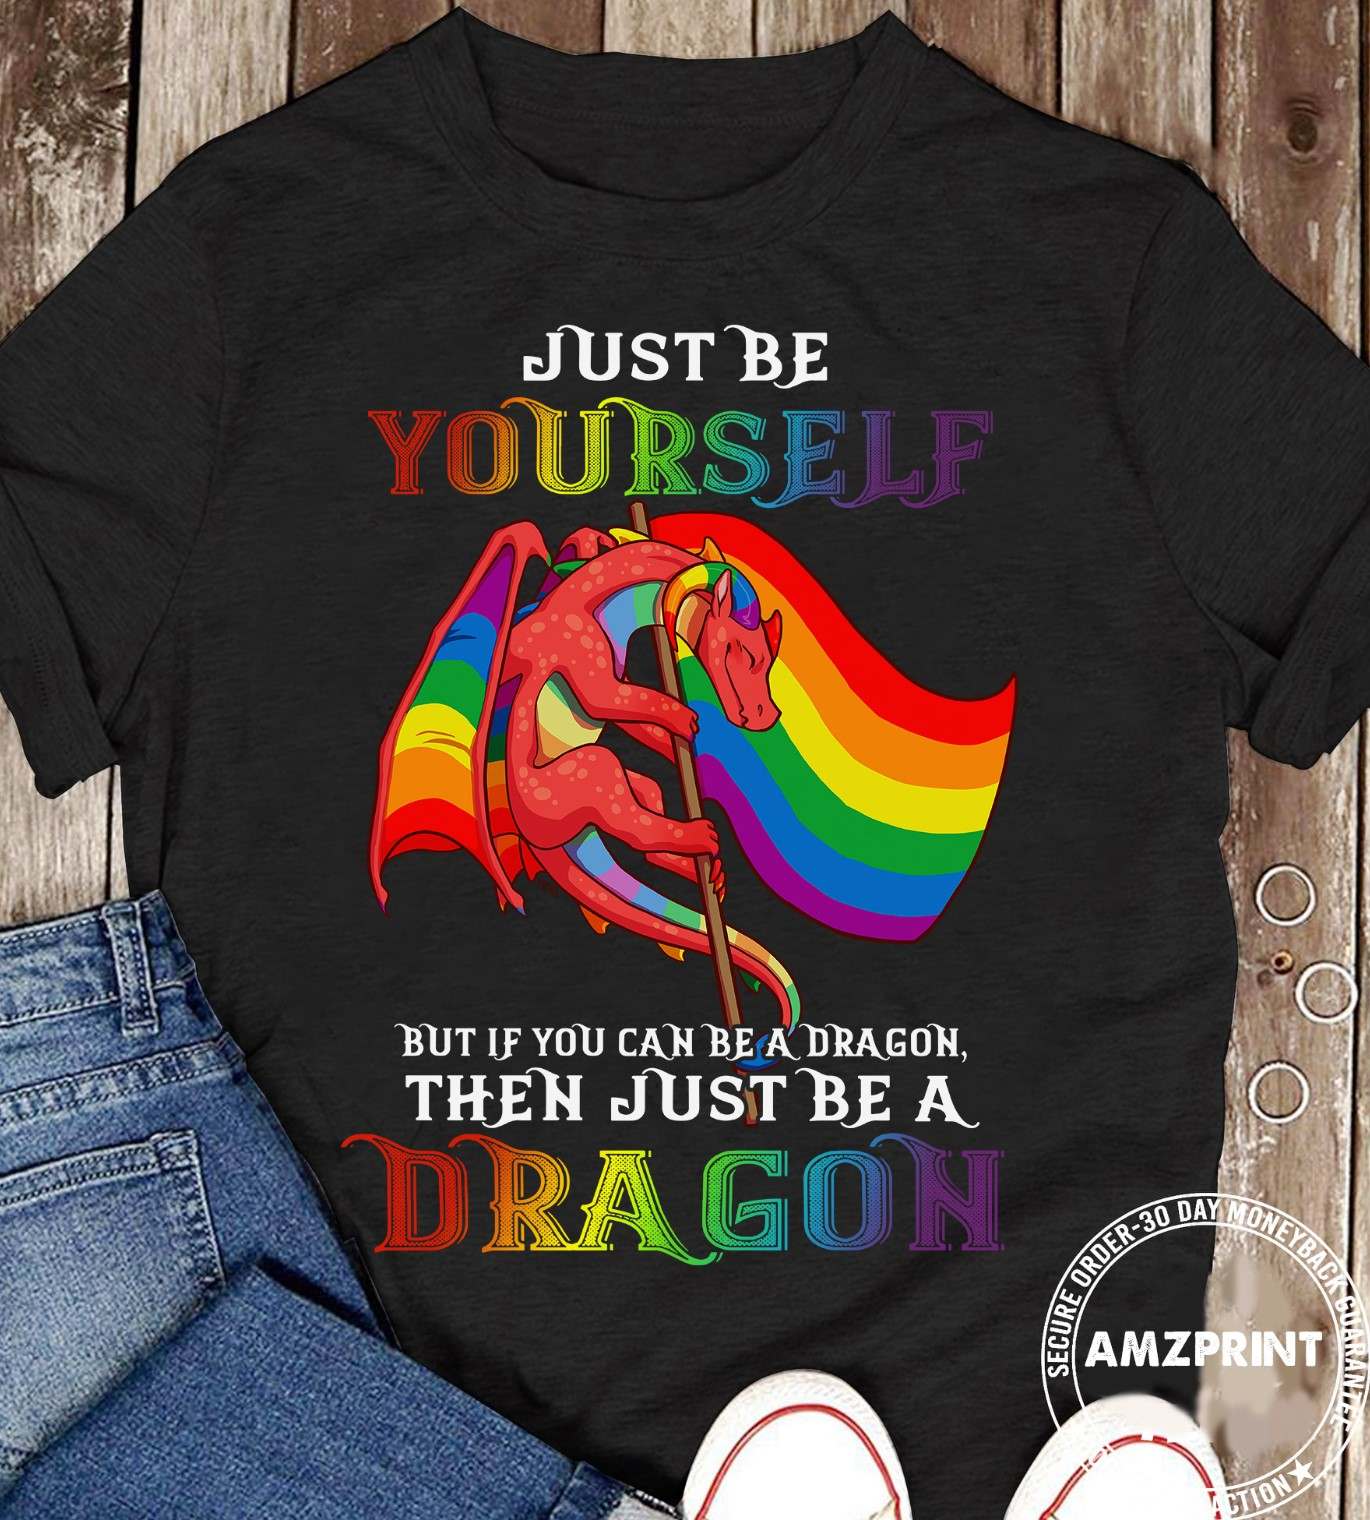 Just be yourself but if you can be a dragon then just be a dragon - Lgbt community, dragon lover